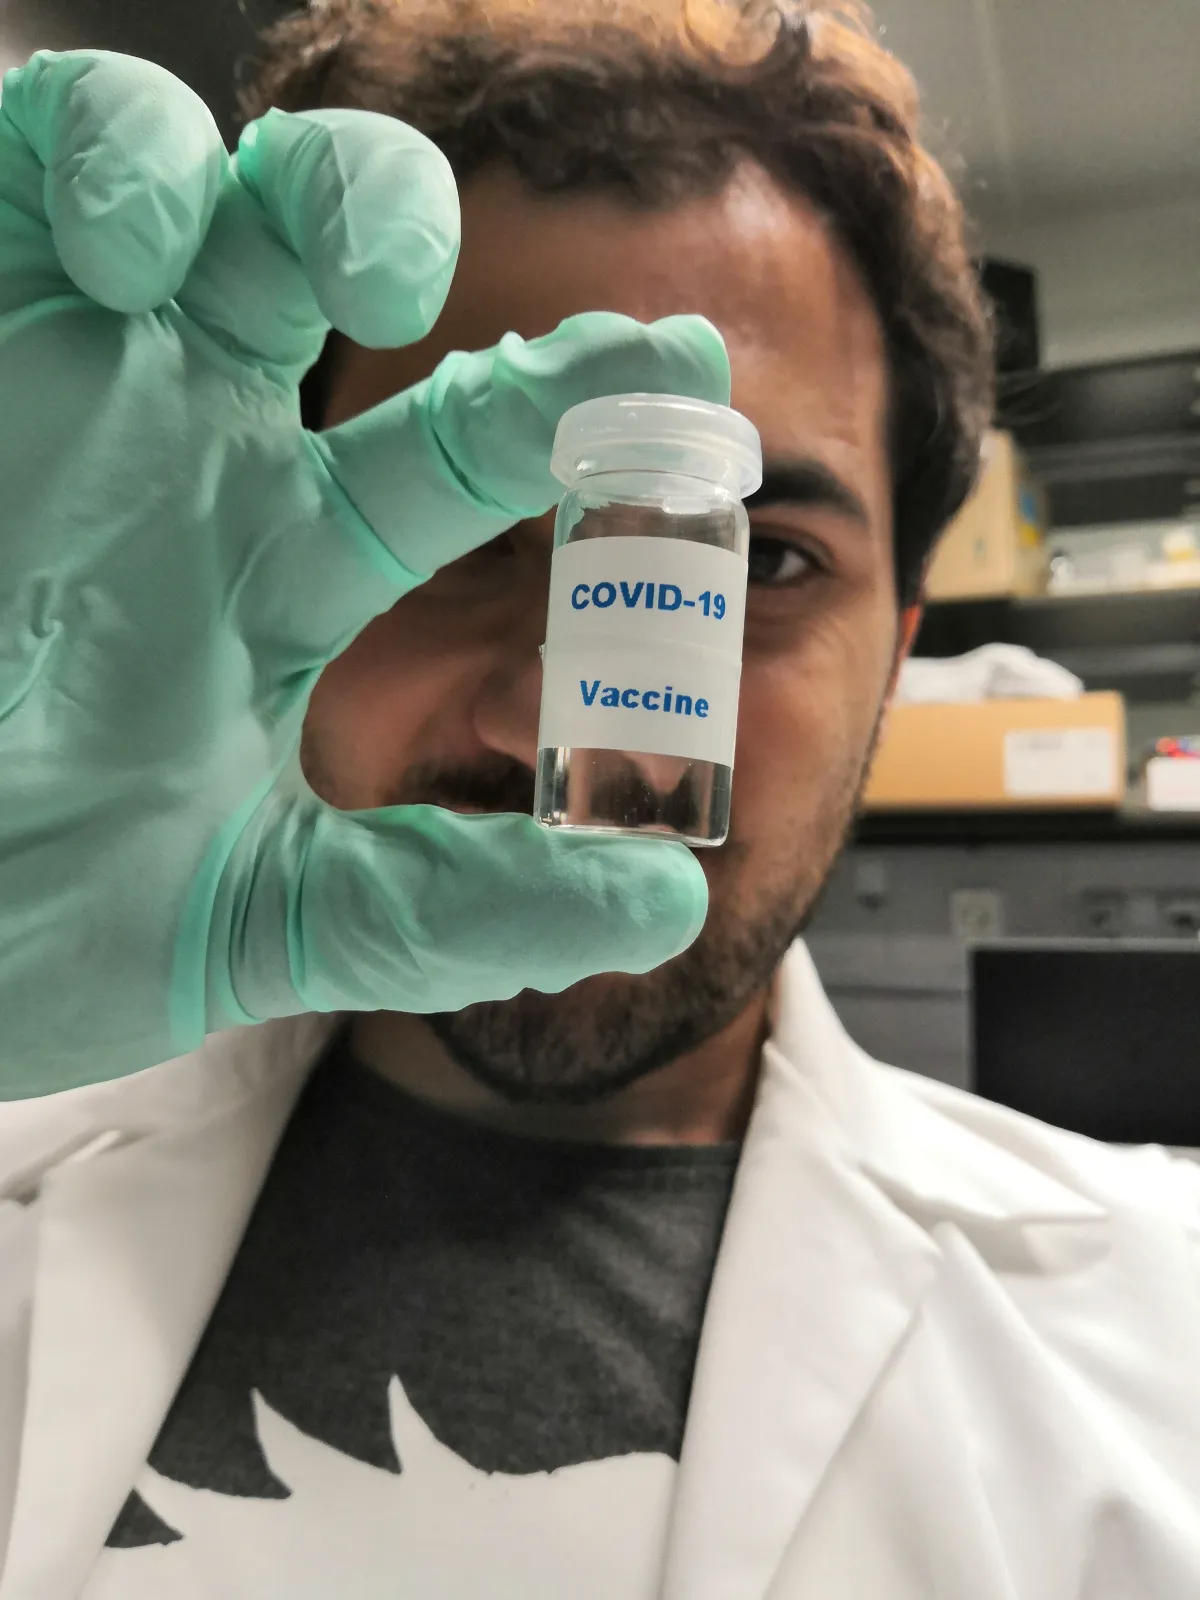 A man with gloved hands holds up a COVID-19 vaccine